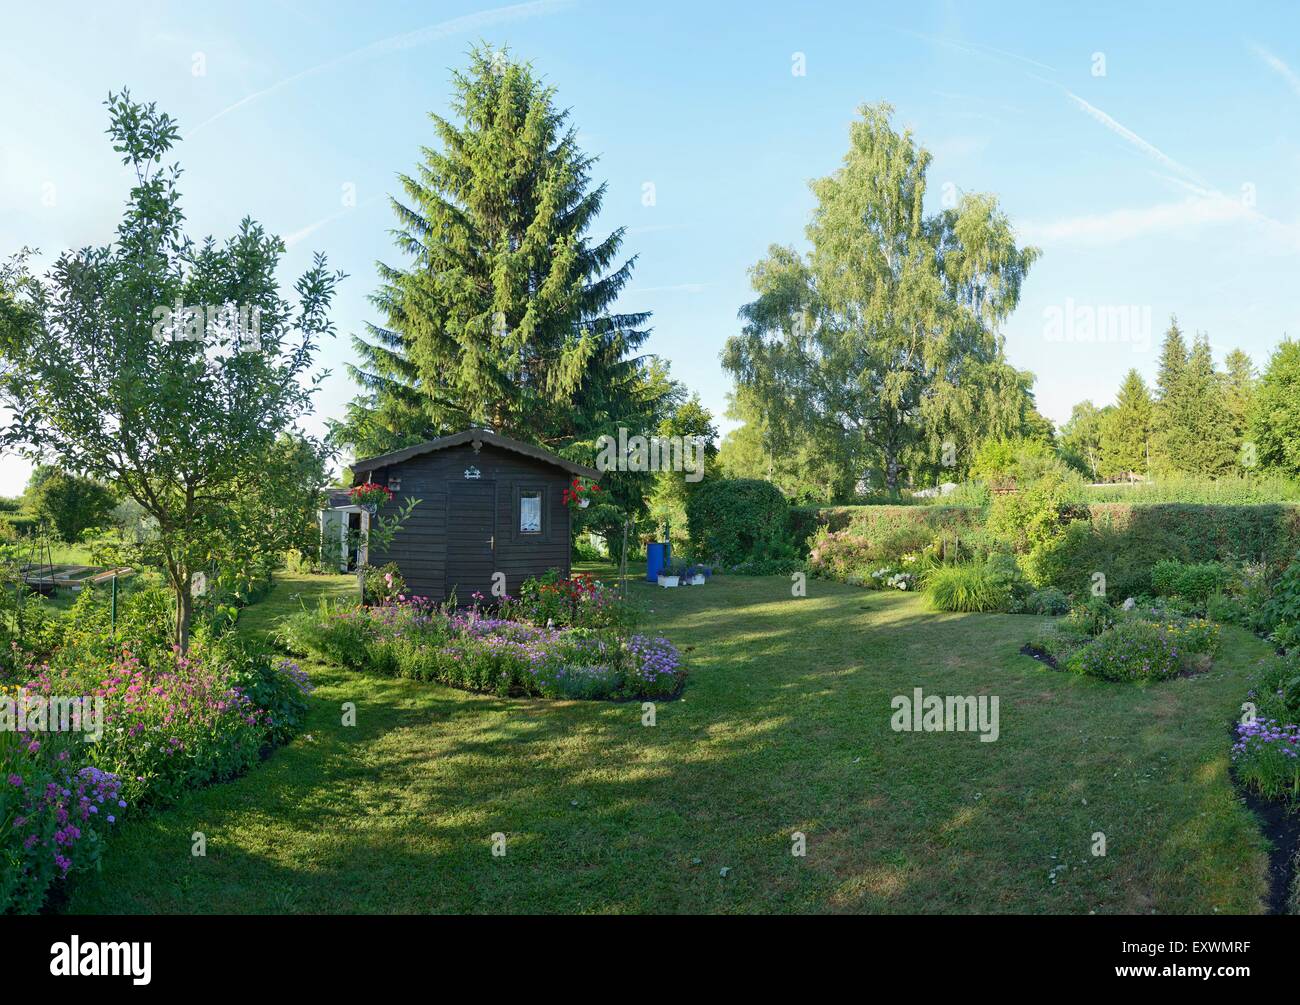 Allotment garden with a little cottagee Bavaria, Germany Stock Photo